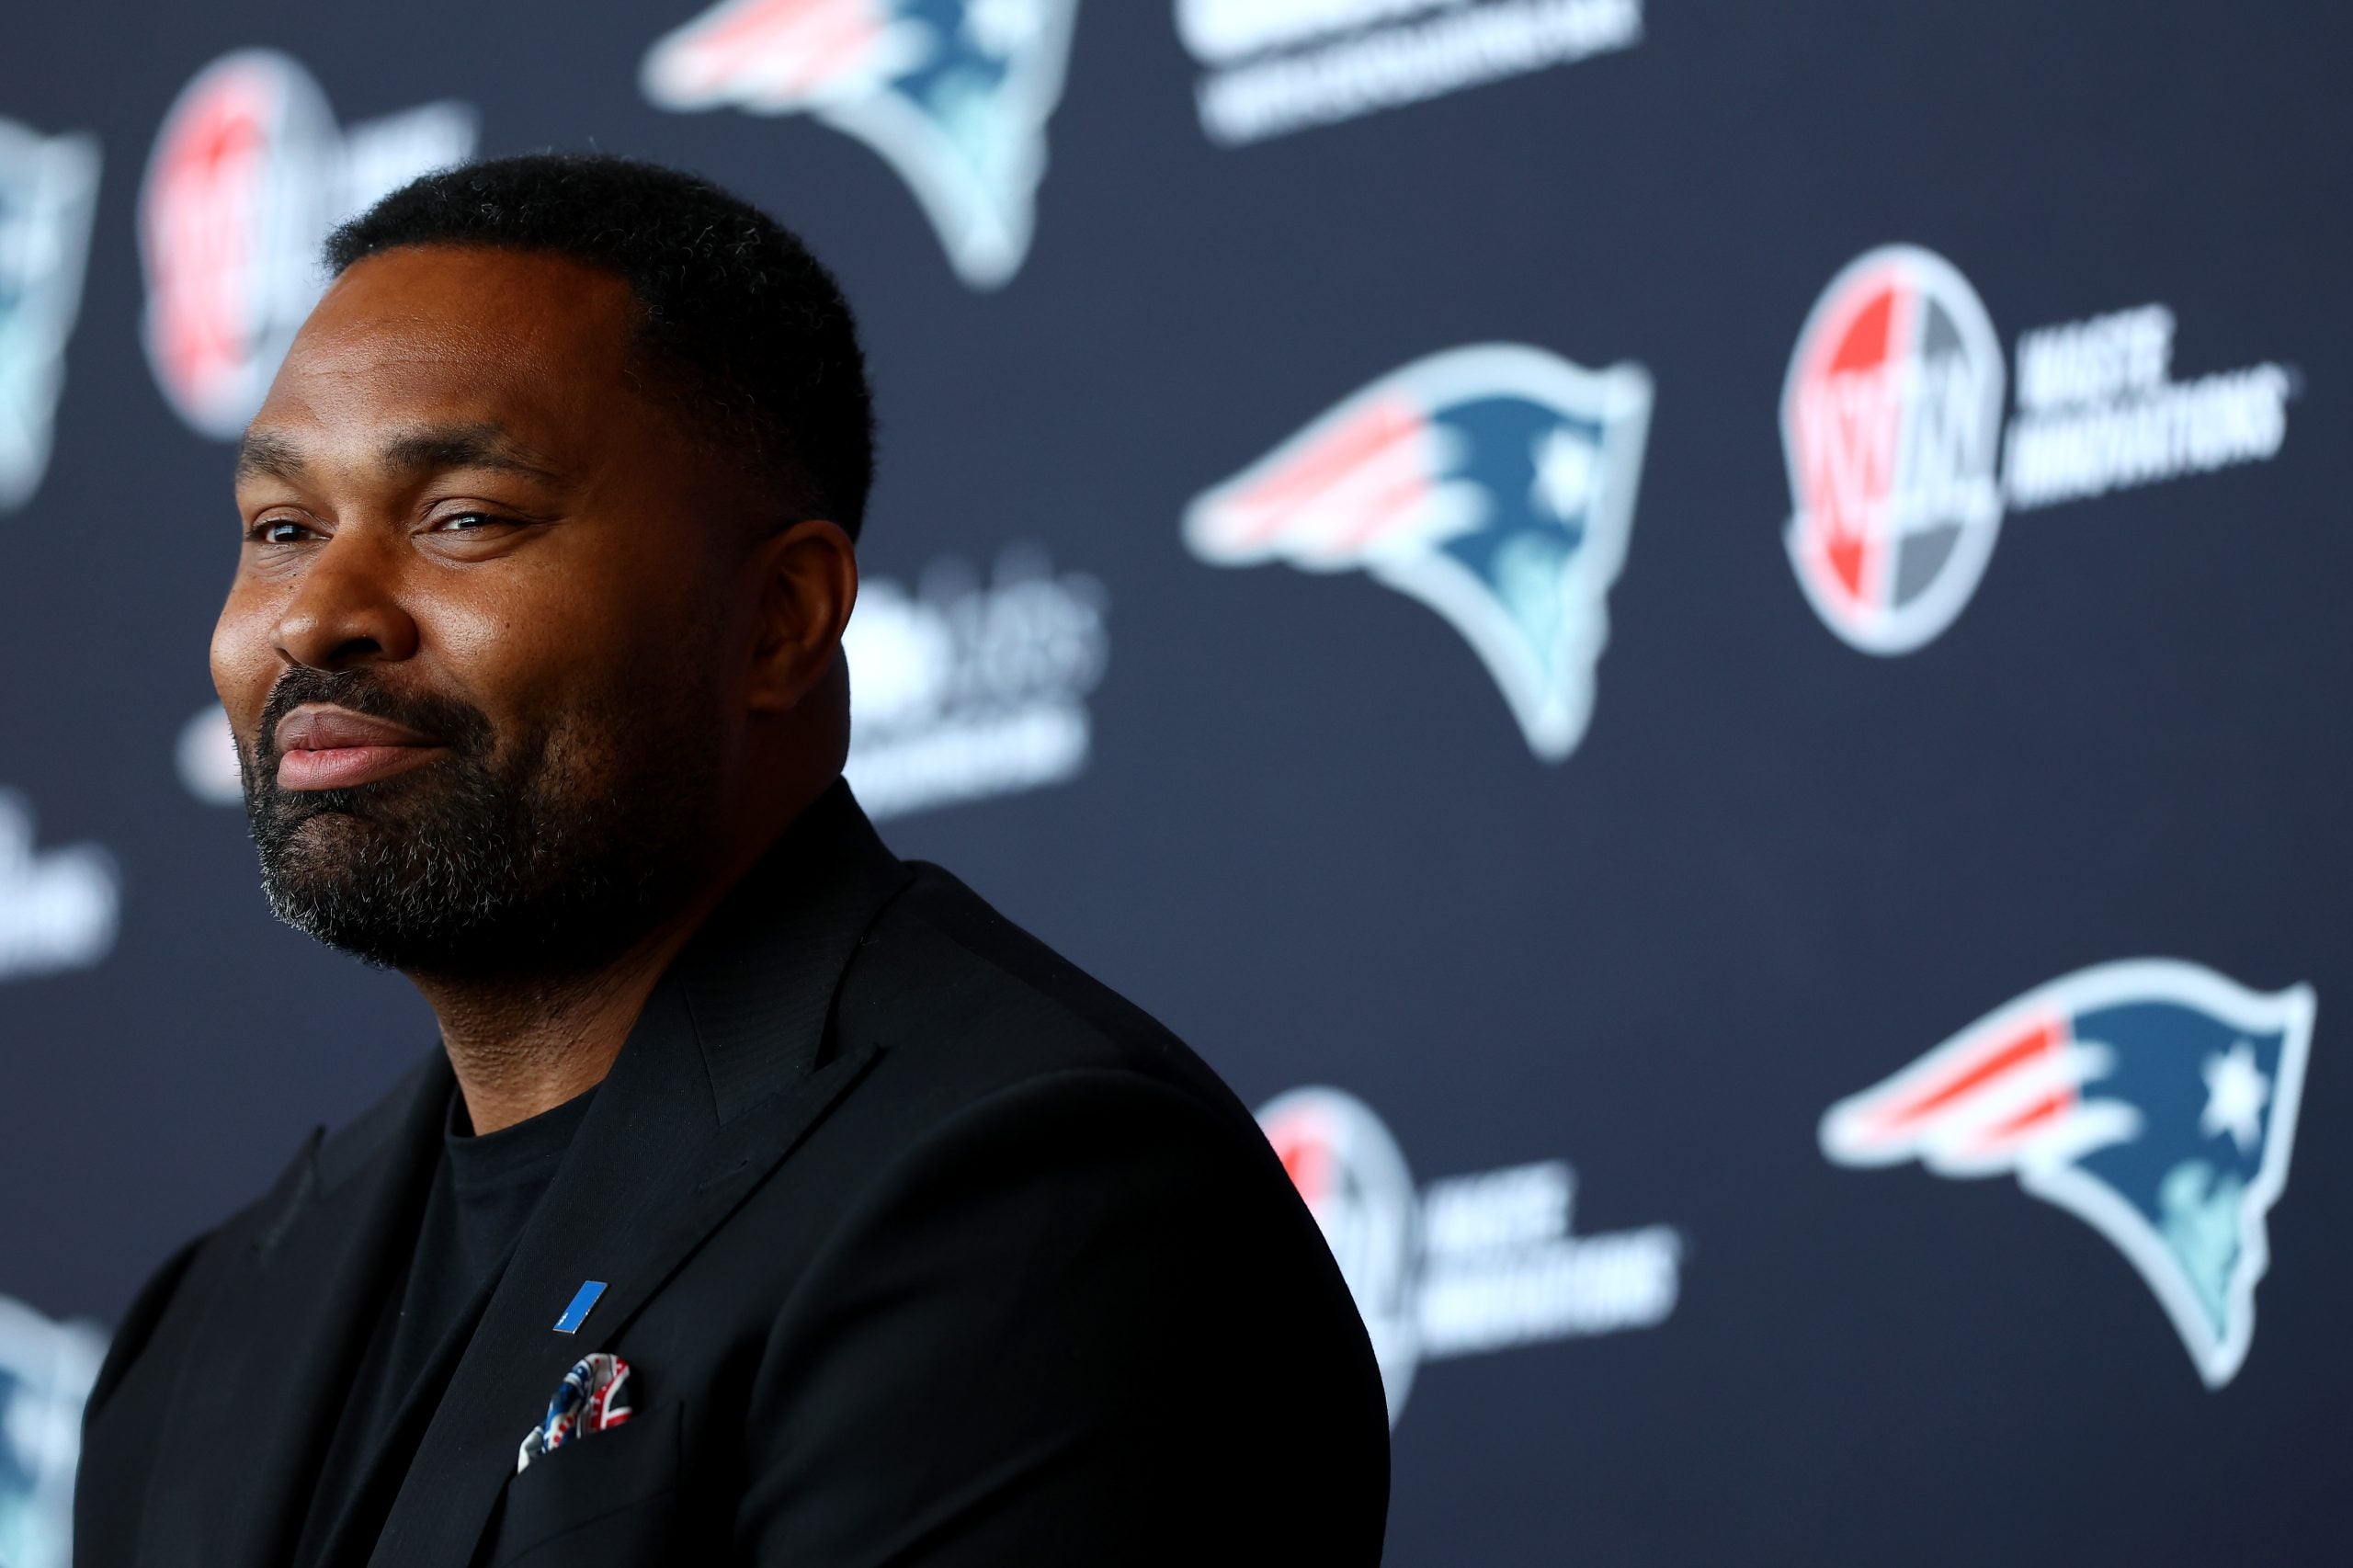 'I Do See Color': Patriots' First Black Head Coach Tackles Issue Of Race In First Press Conference